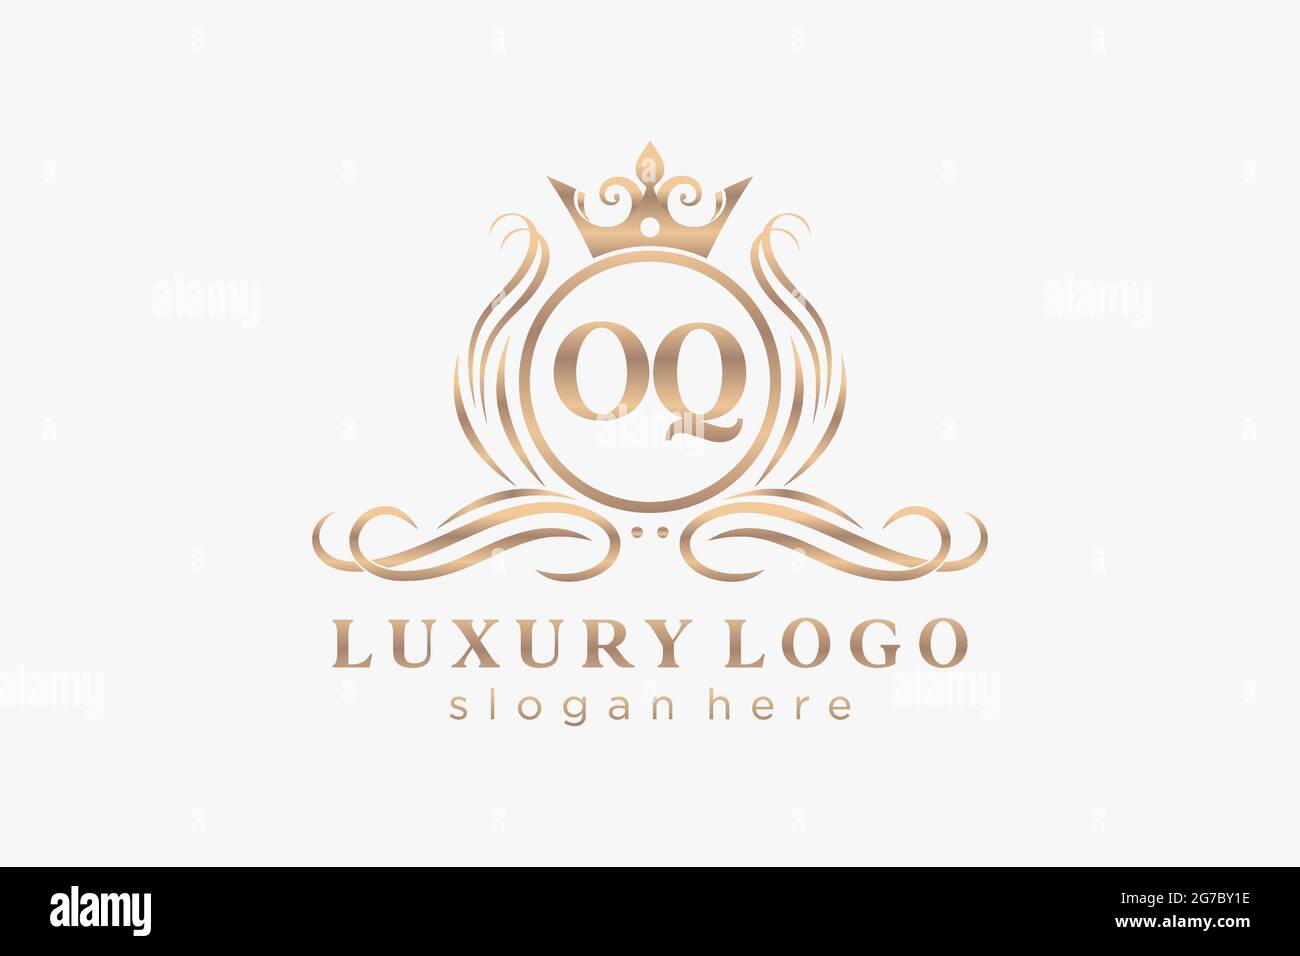 OQ Letter Royal Luxury Logo template in vector art for Restaurant, Royalty, Boutique, Cafe, Hotel, Heraldic, Jewelry, Fashion and other vector illustr Stock Vector